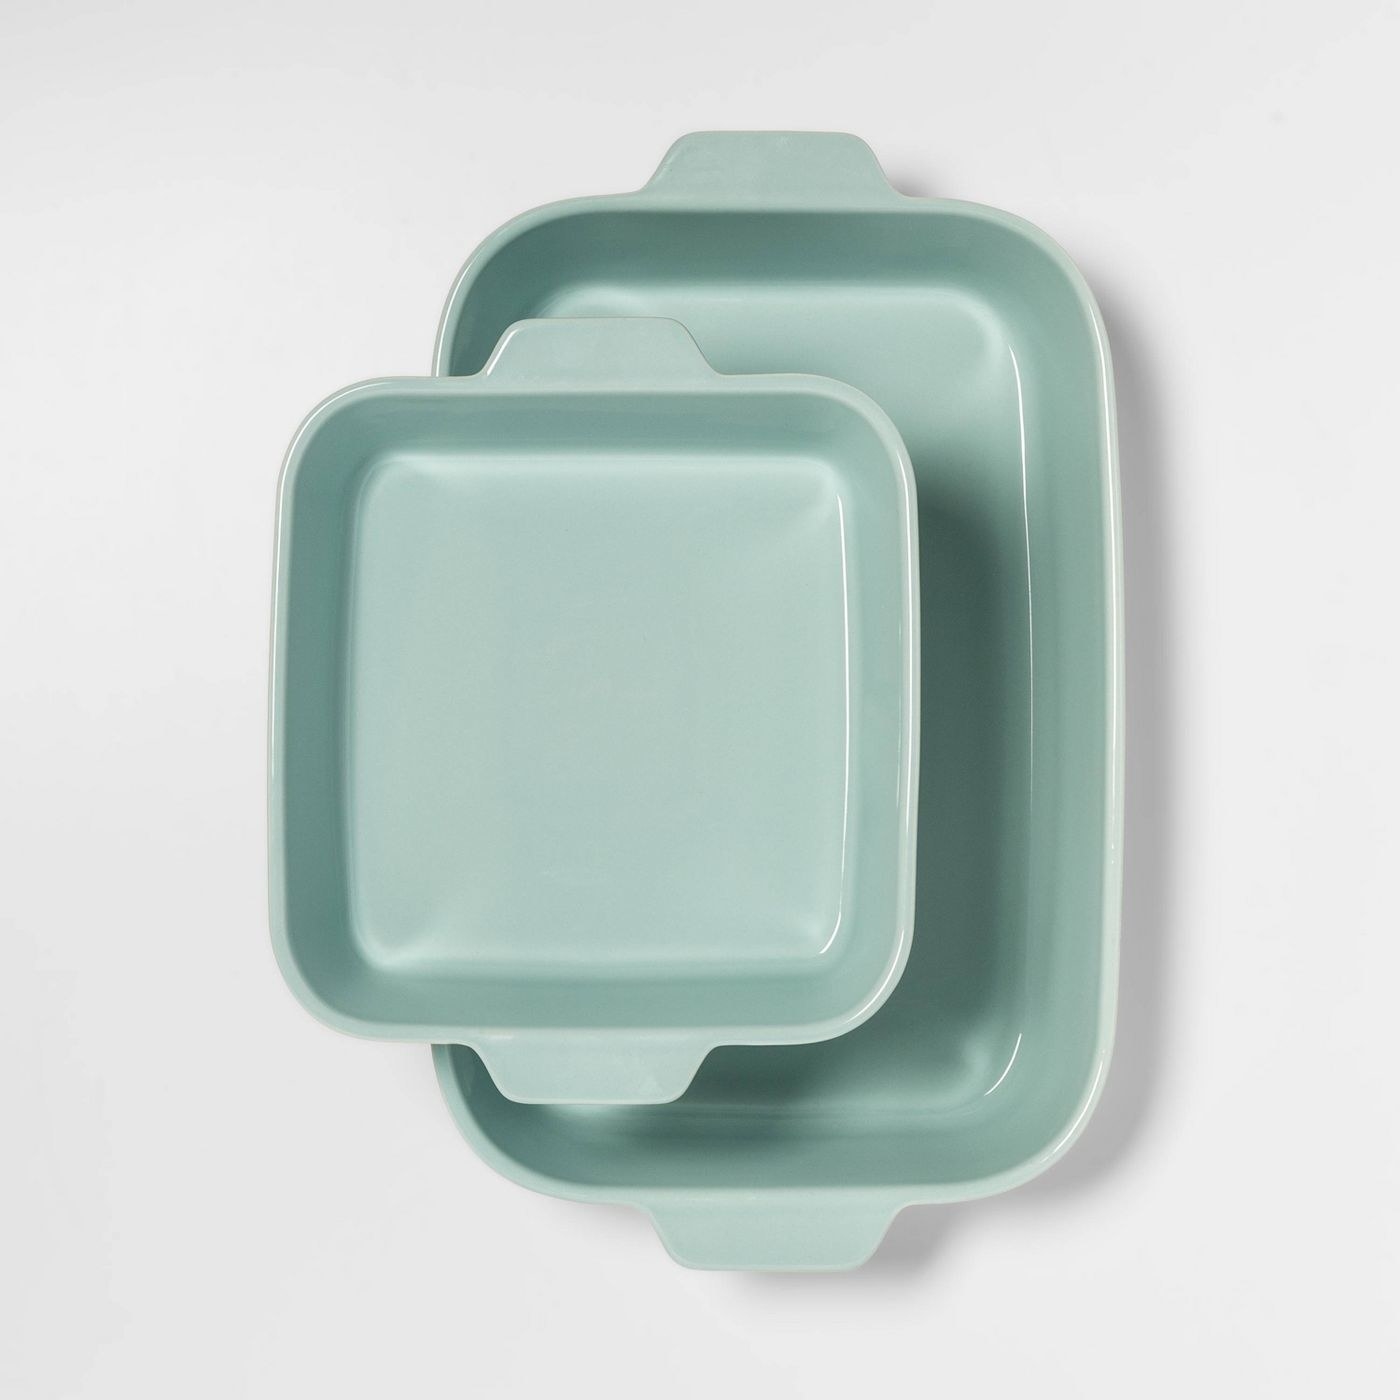 The two rectagular baking dishes in a light aqua color